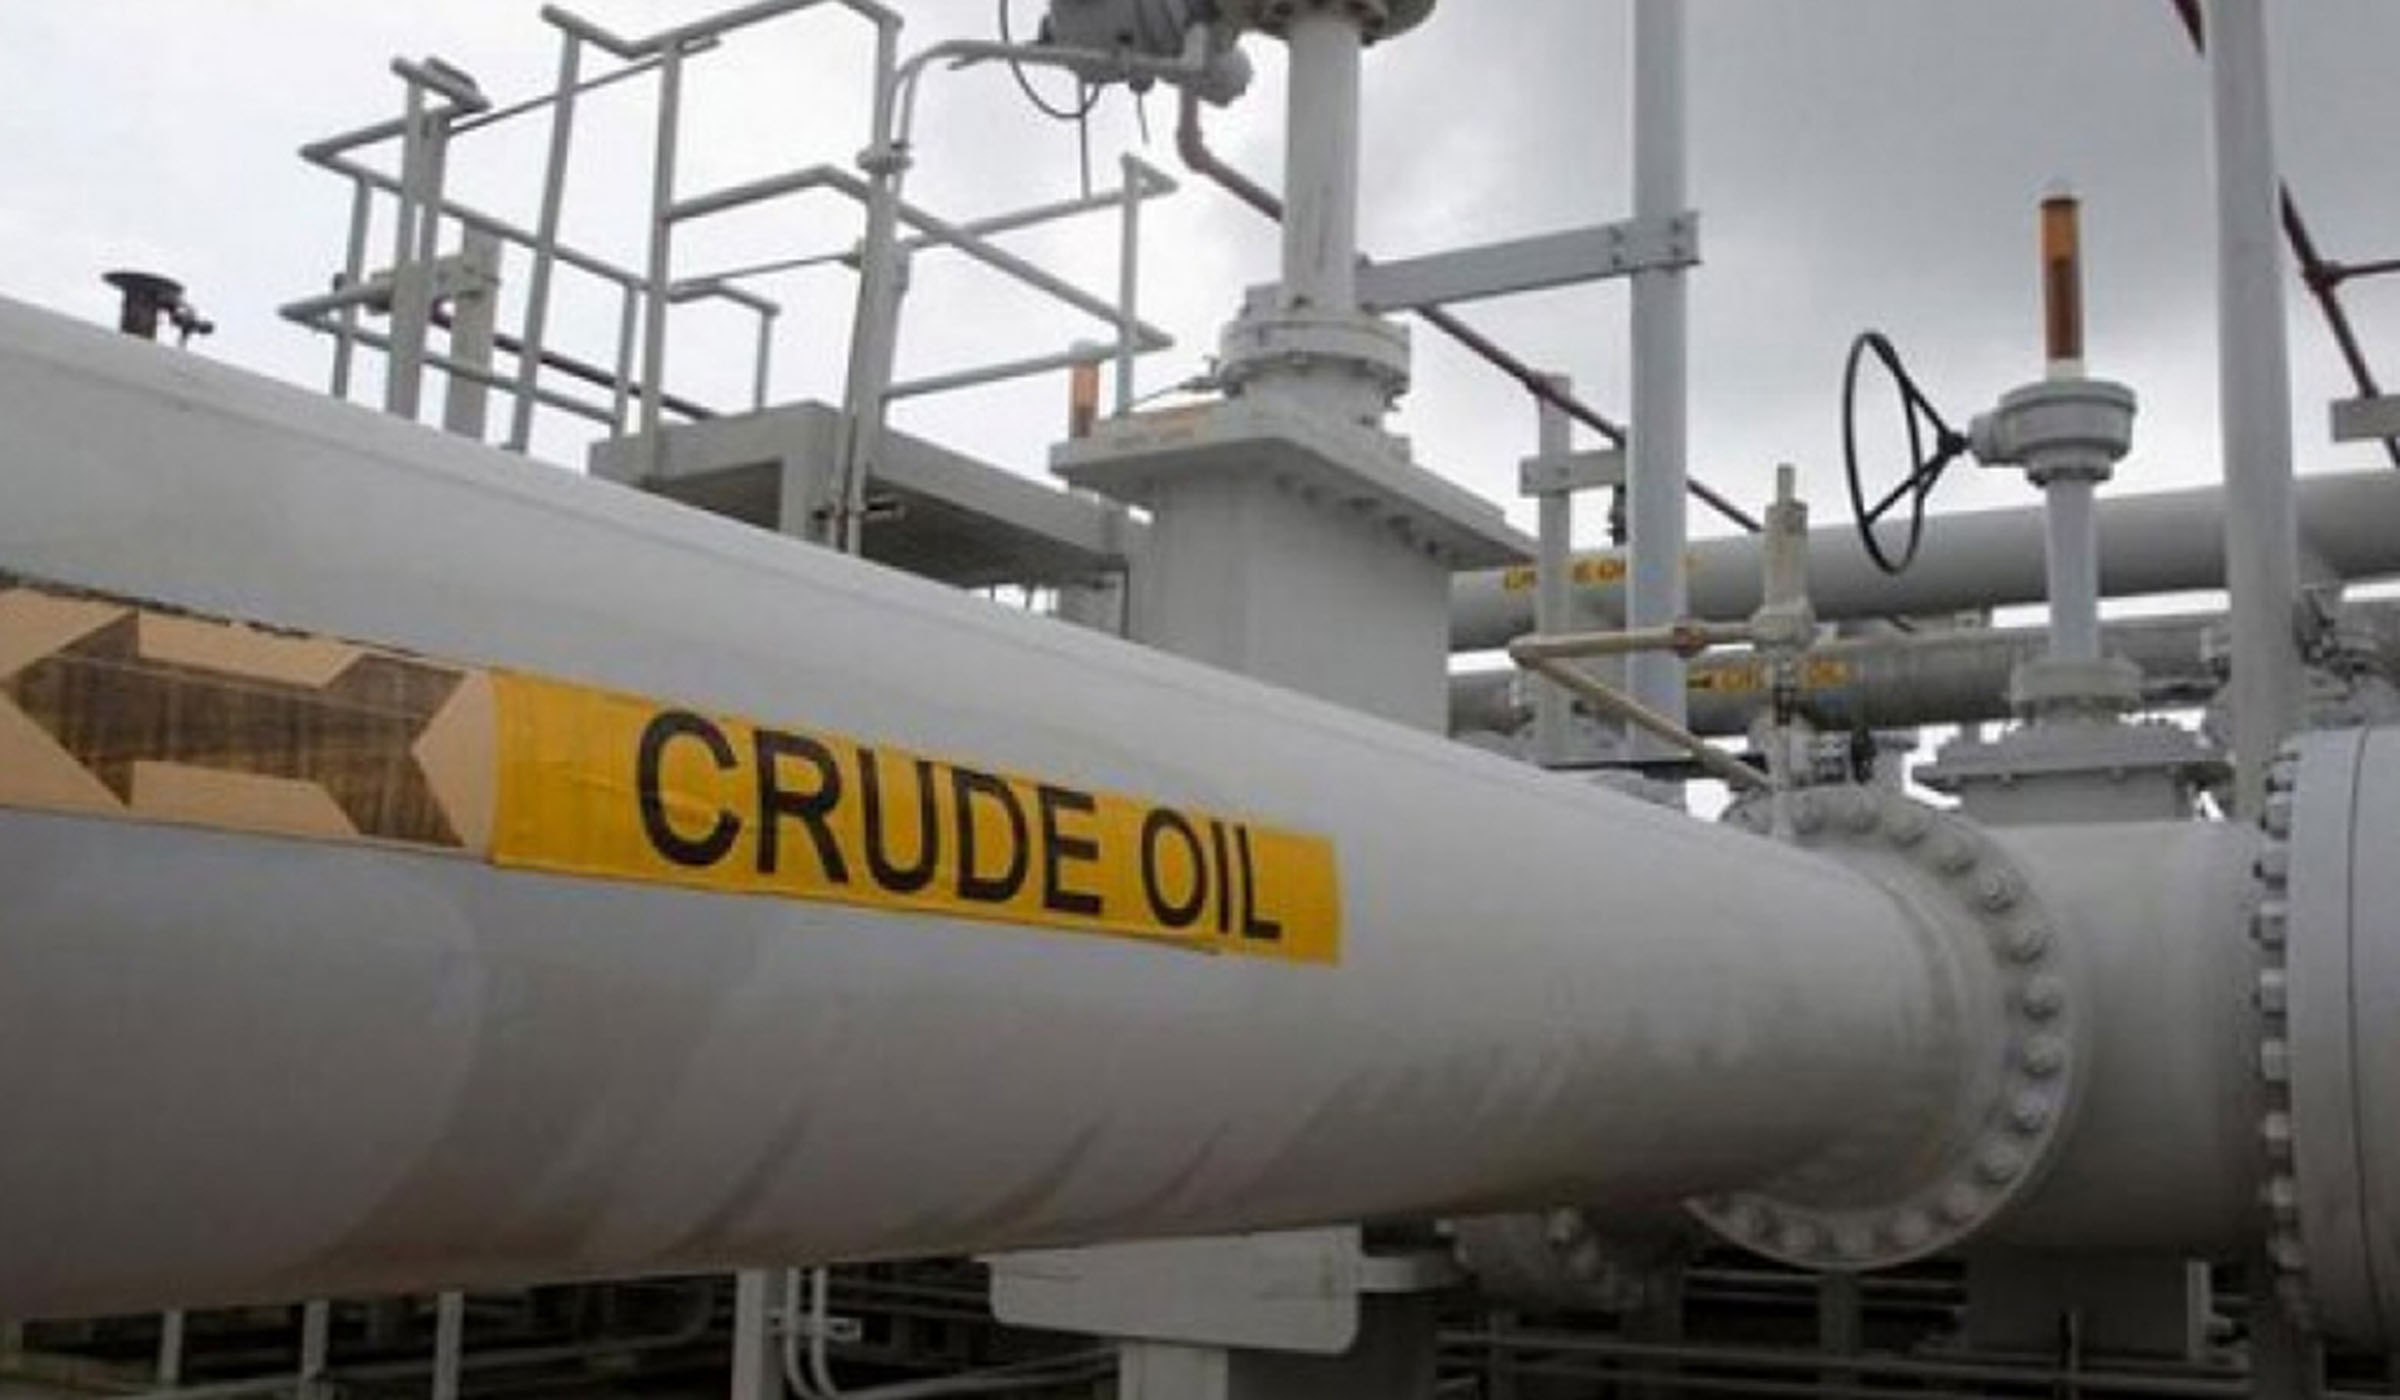 The World Bank Commodity Outlook report shows that crude oil is expected to average at USD 66 a barrel in 2019 and USD 65 a barrel in 2020, lower than the October projections. Net photo.